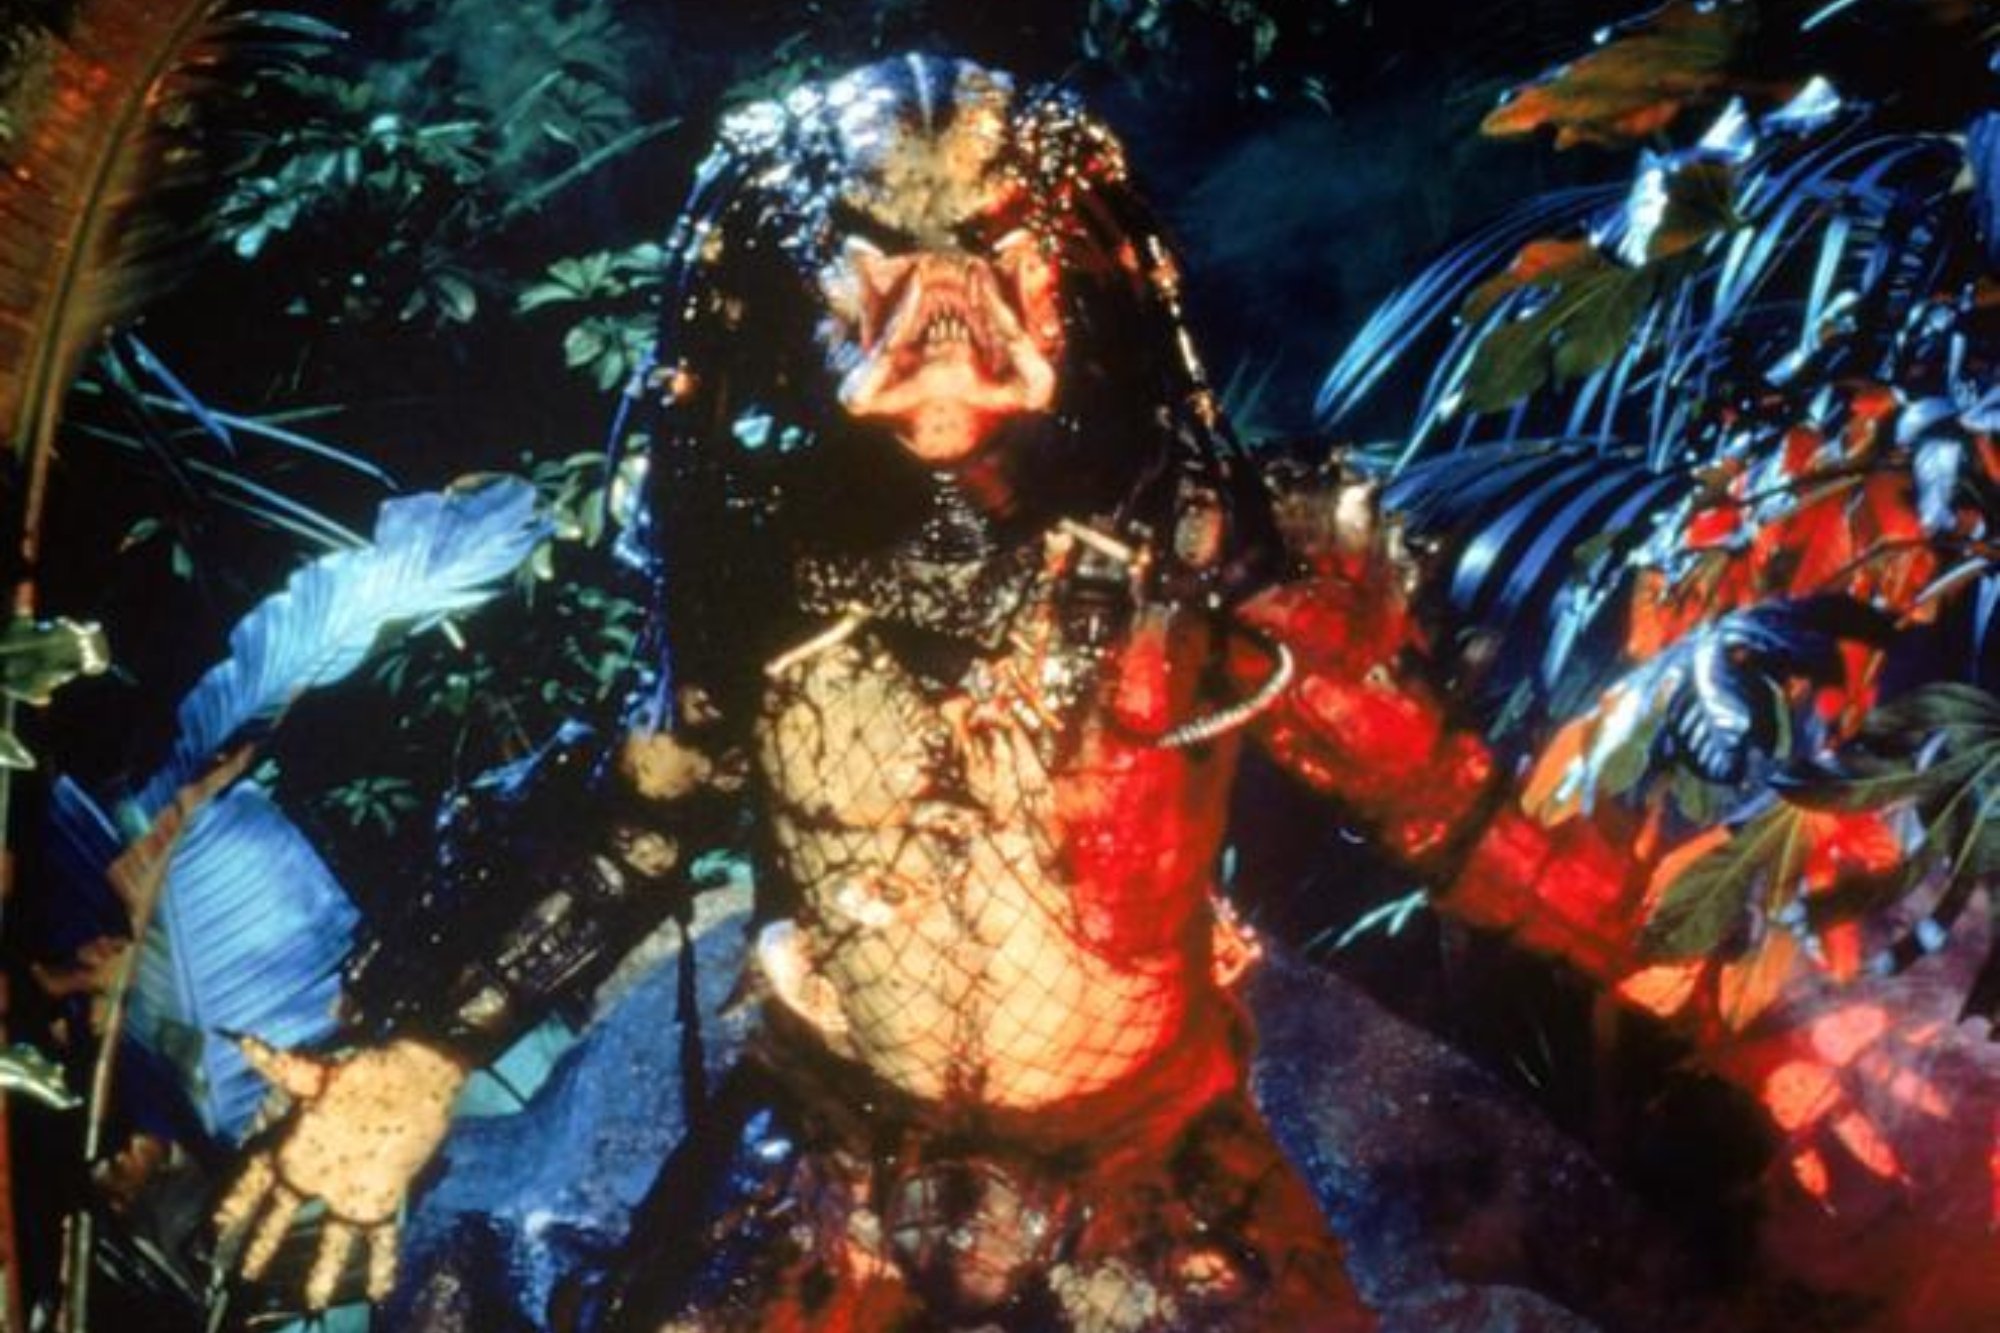 Which Alien and Predator Films Were Most Profitable?